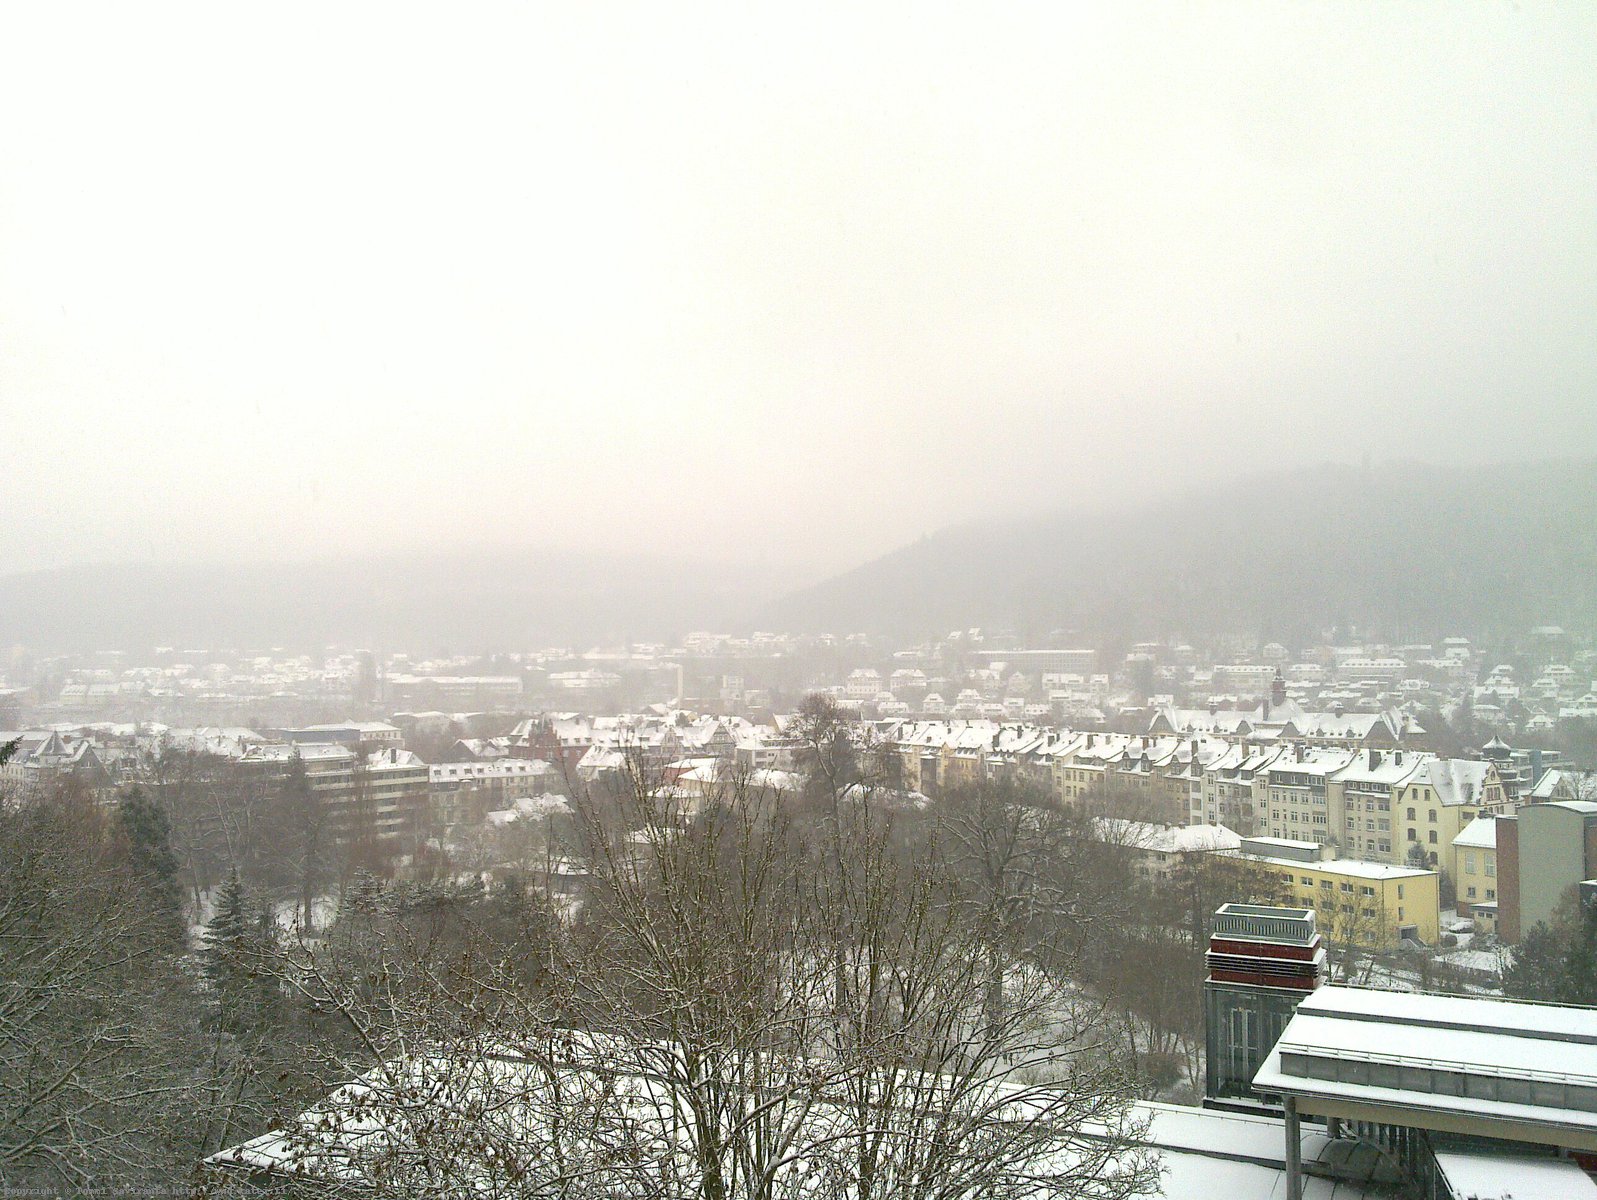 Foggy view over Marburg